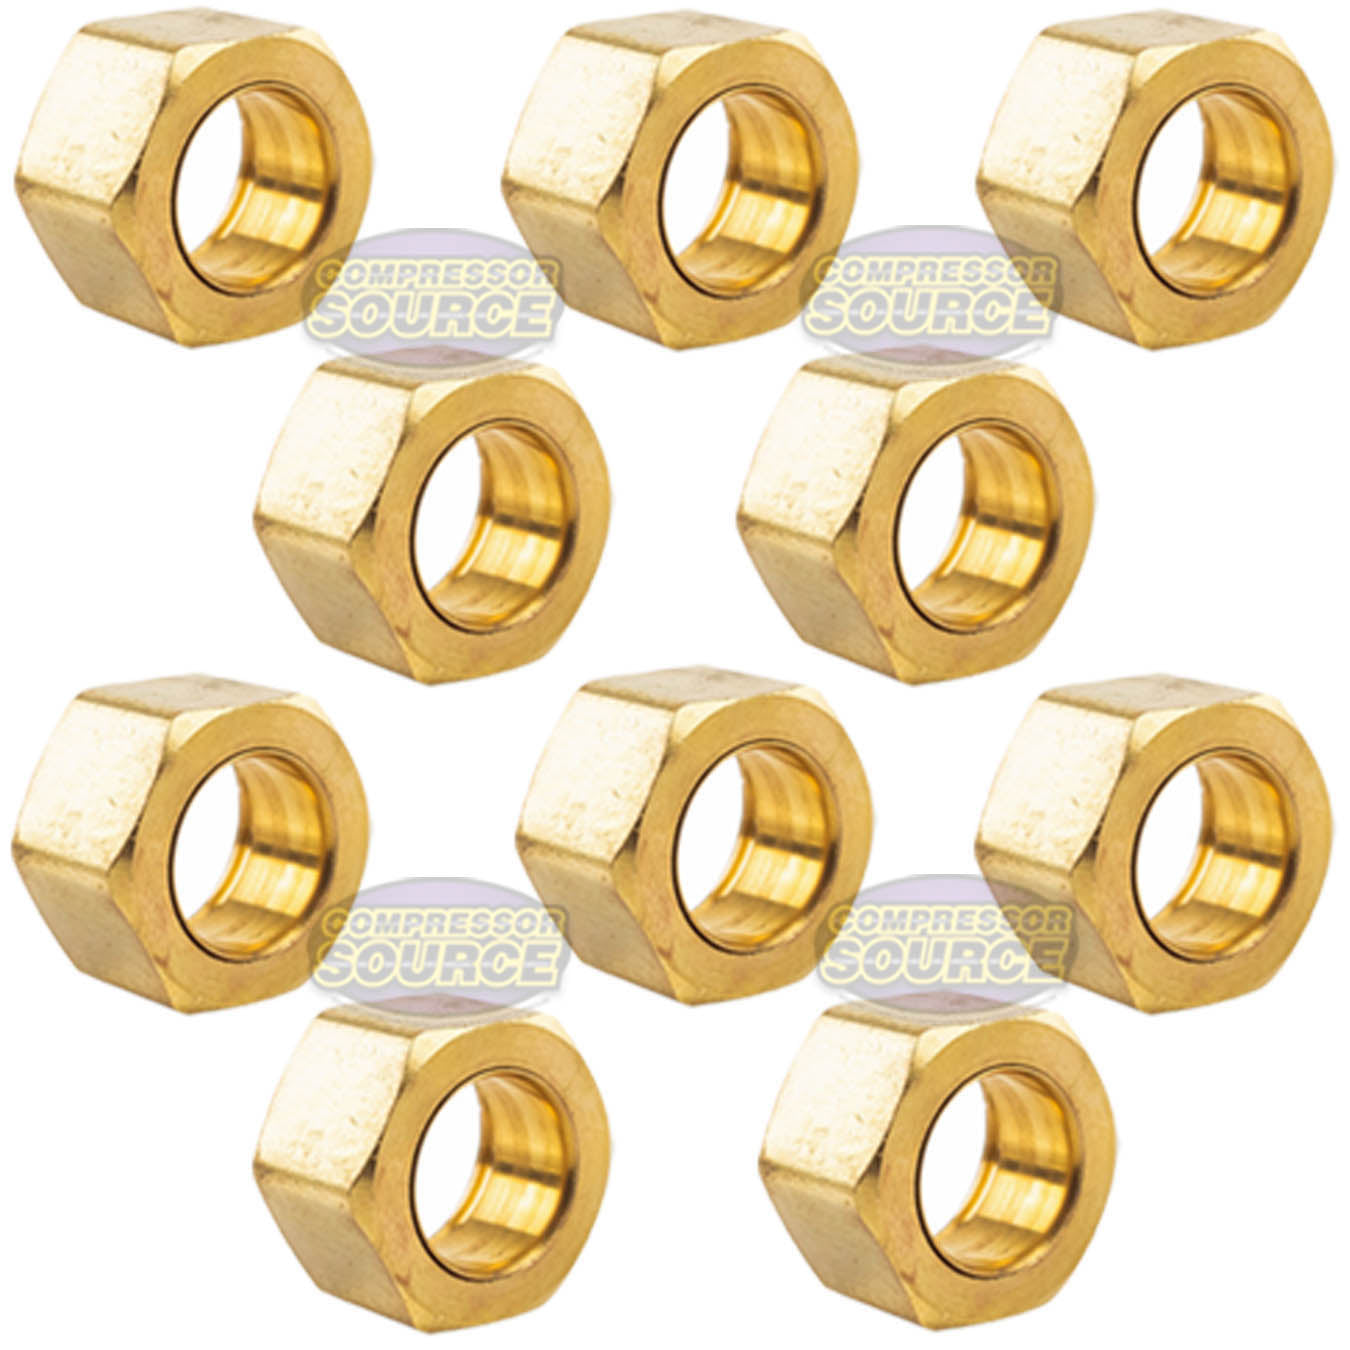 10 Pack 1/2" Compression Nut & Ferrule Combo for 1/2" OD Tube Brass Sleeve Nut